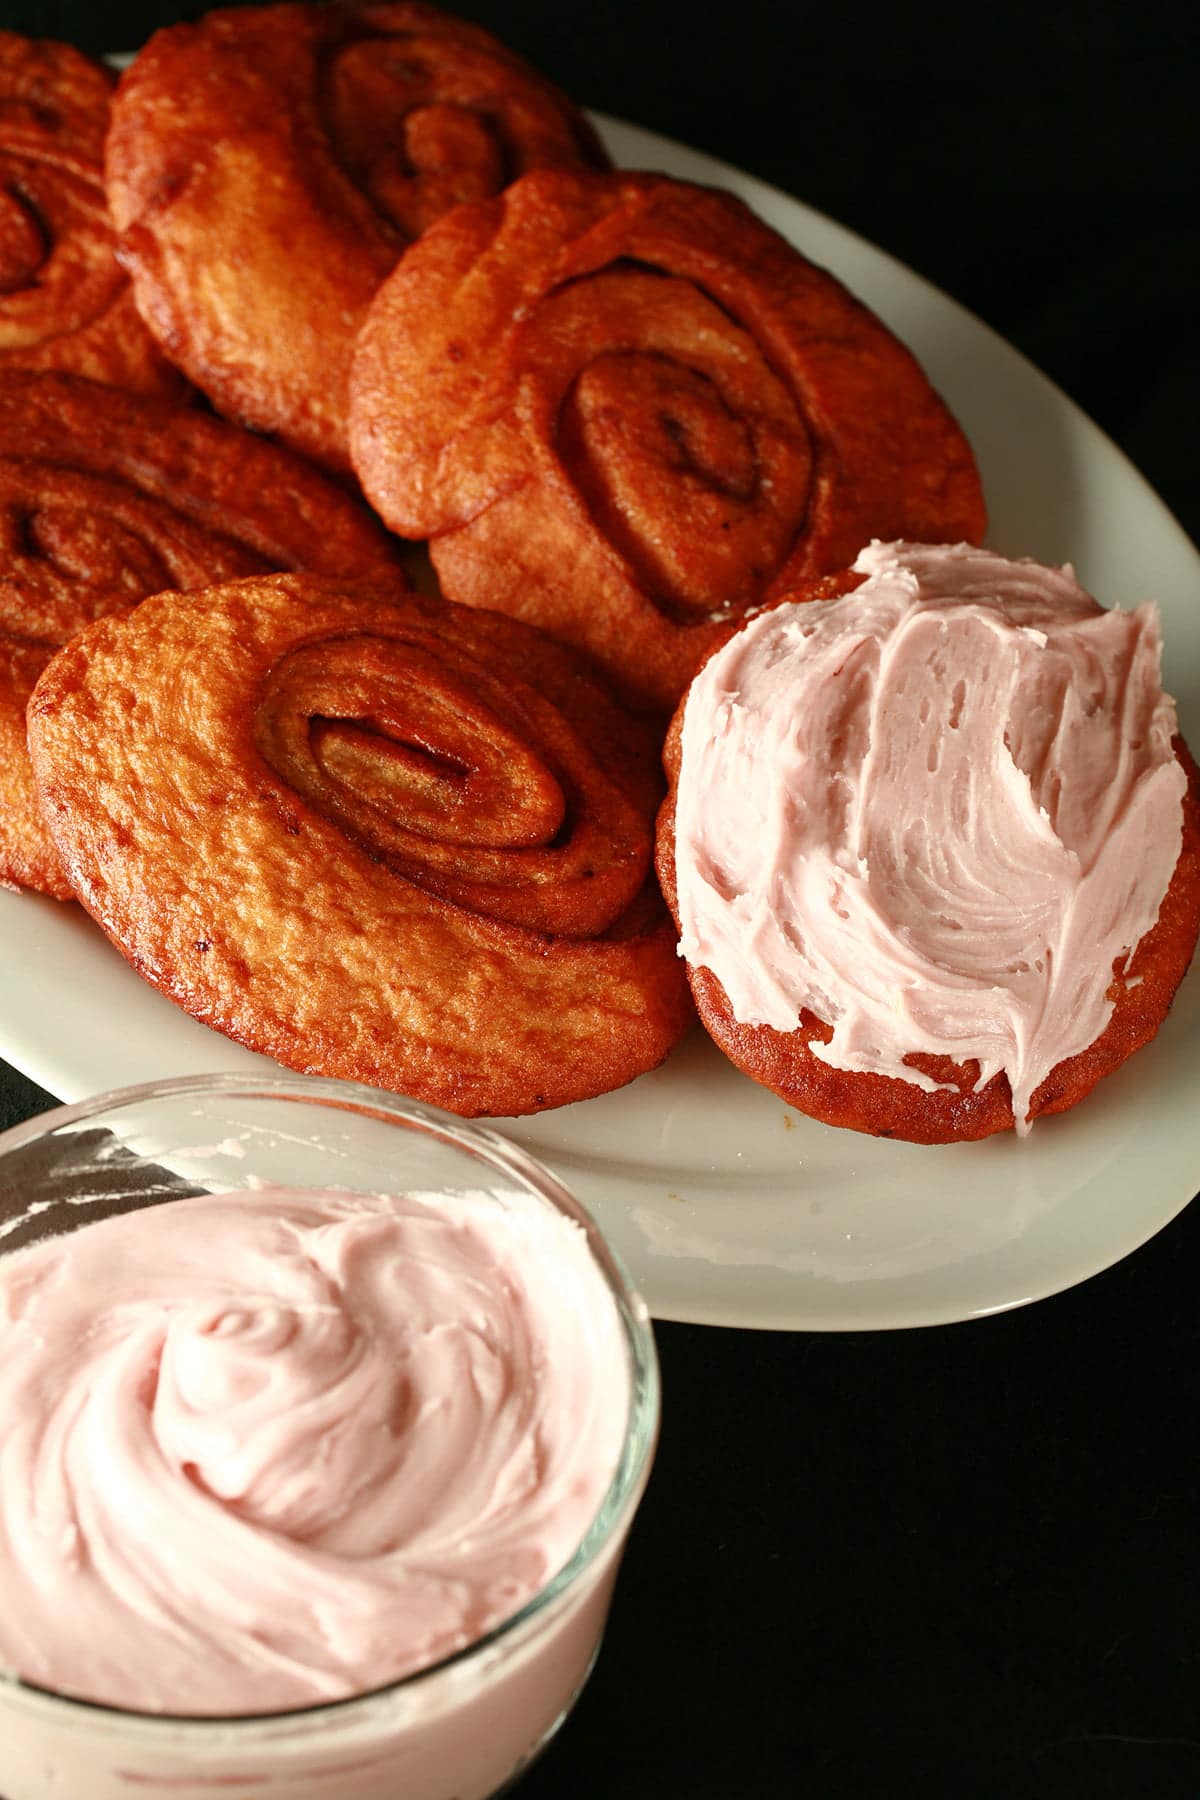 Deep fried cinnamon rolls are arranged on a white platter, one is spread with a pink frosting - - made with this Persians recipe